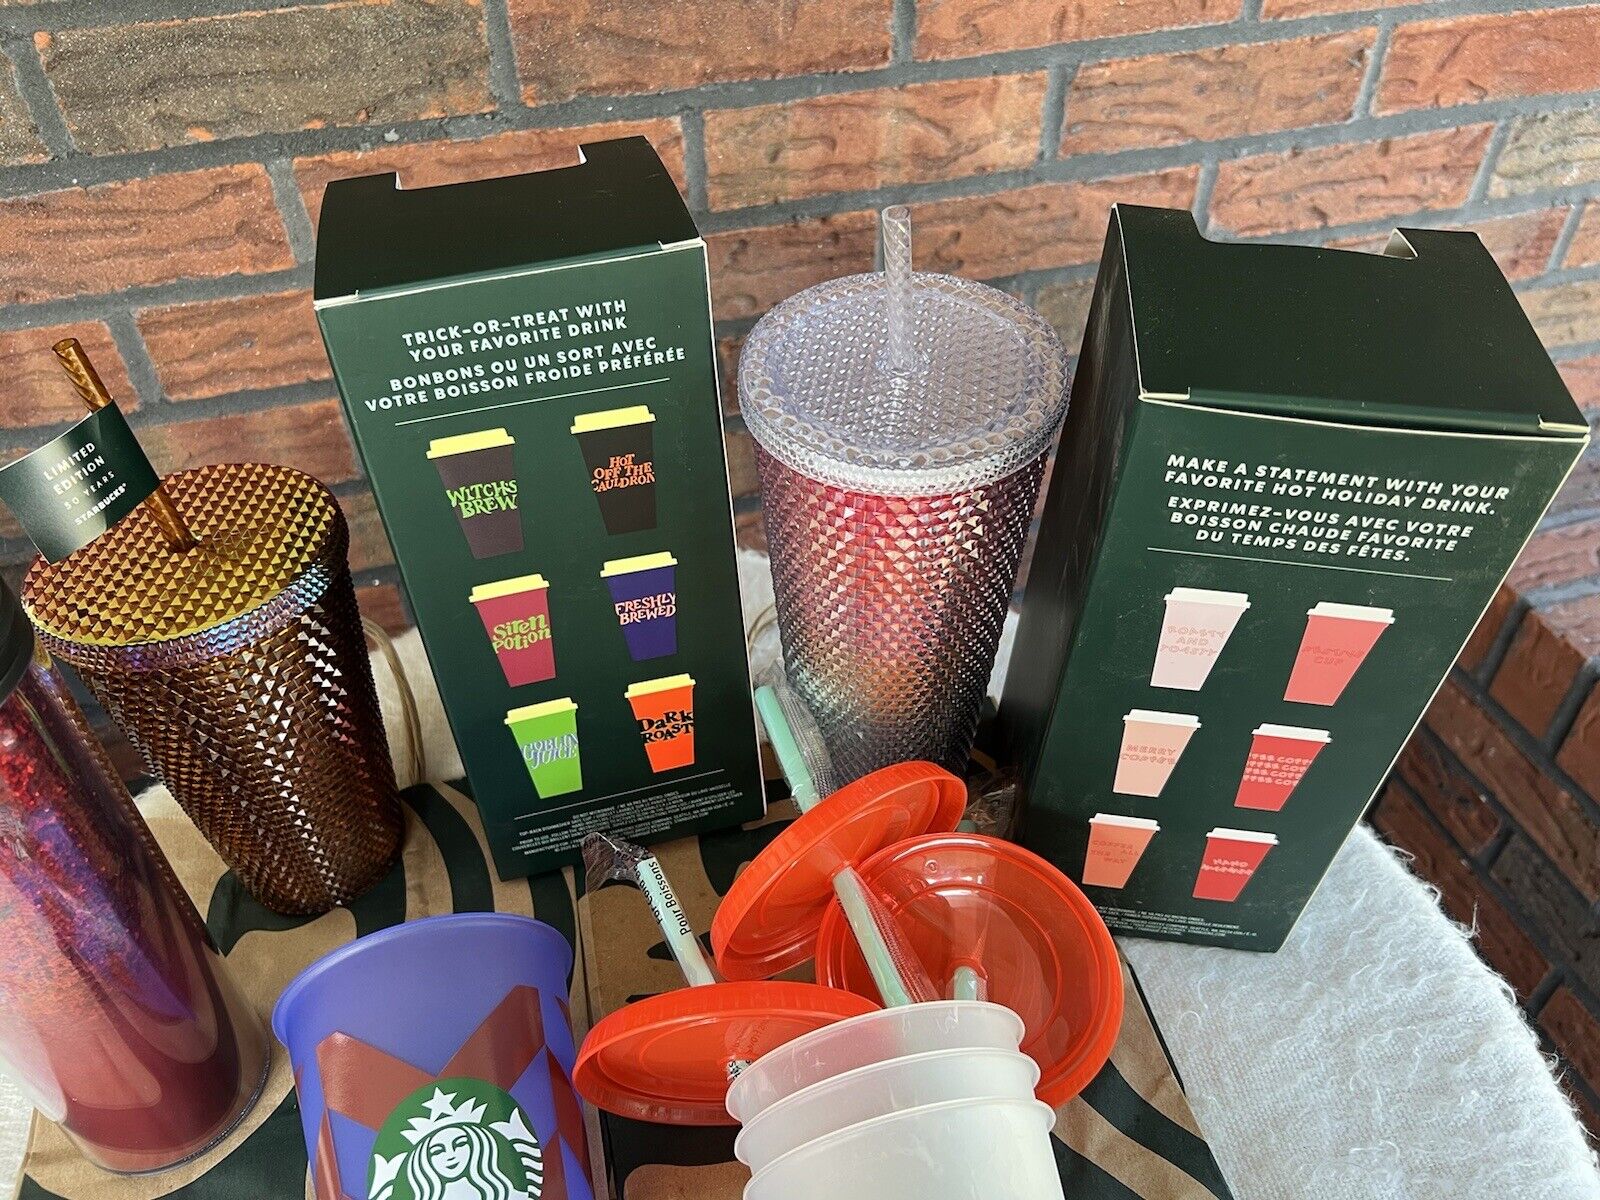 Lot 21 Starbucks Cups Mugs Tumblers Studded Limited Edition Hot Cold Straws Bags